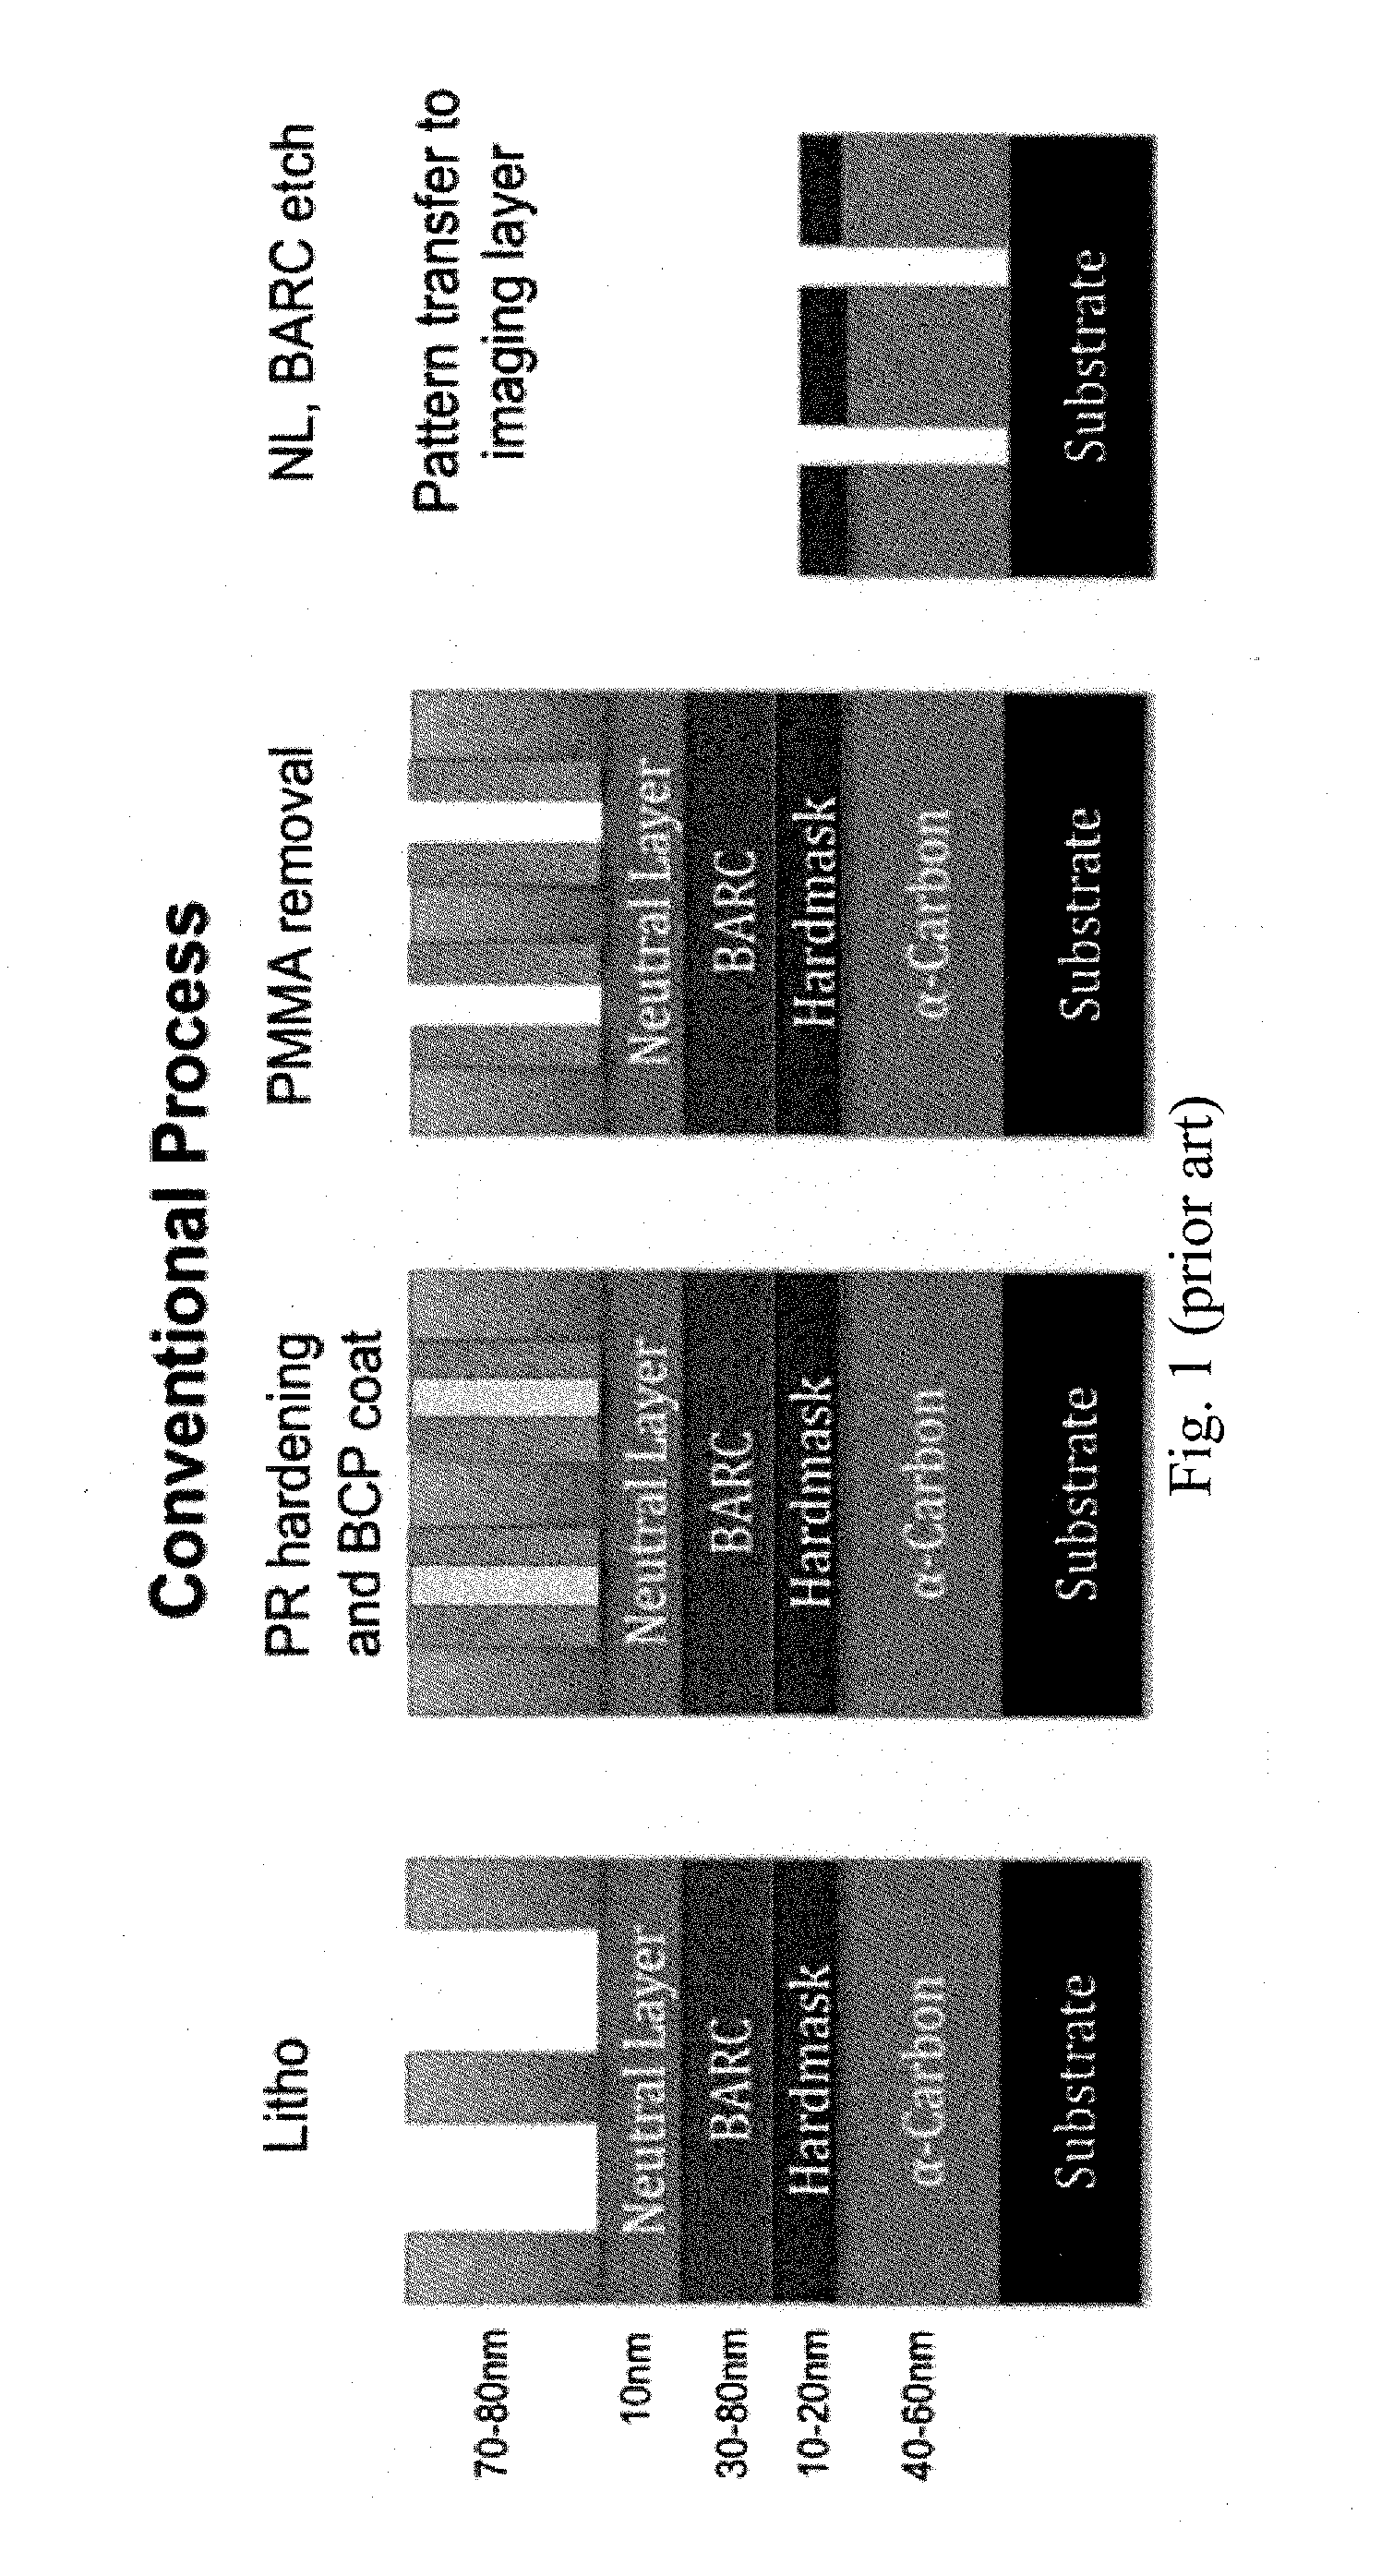 Silicon hardmask layer for directed self-assembly